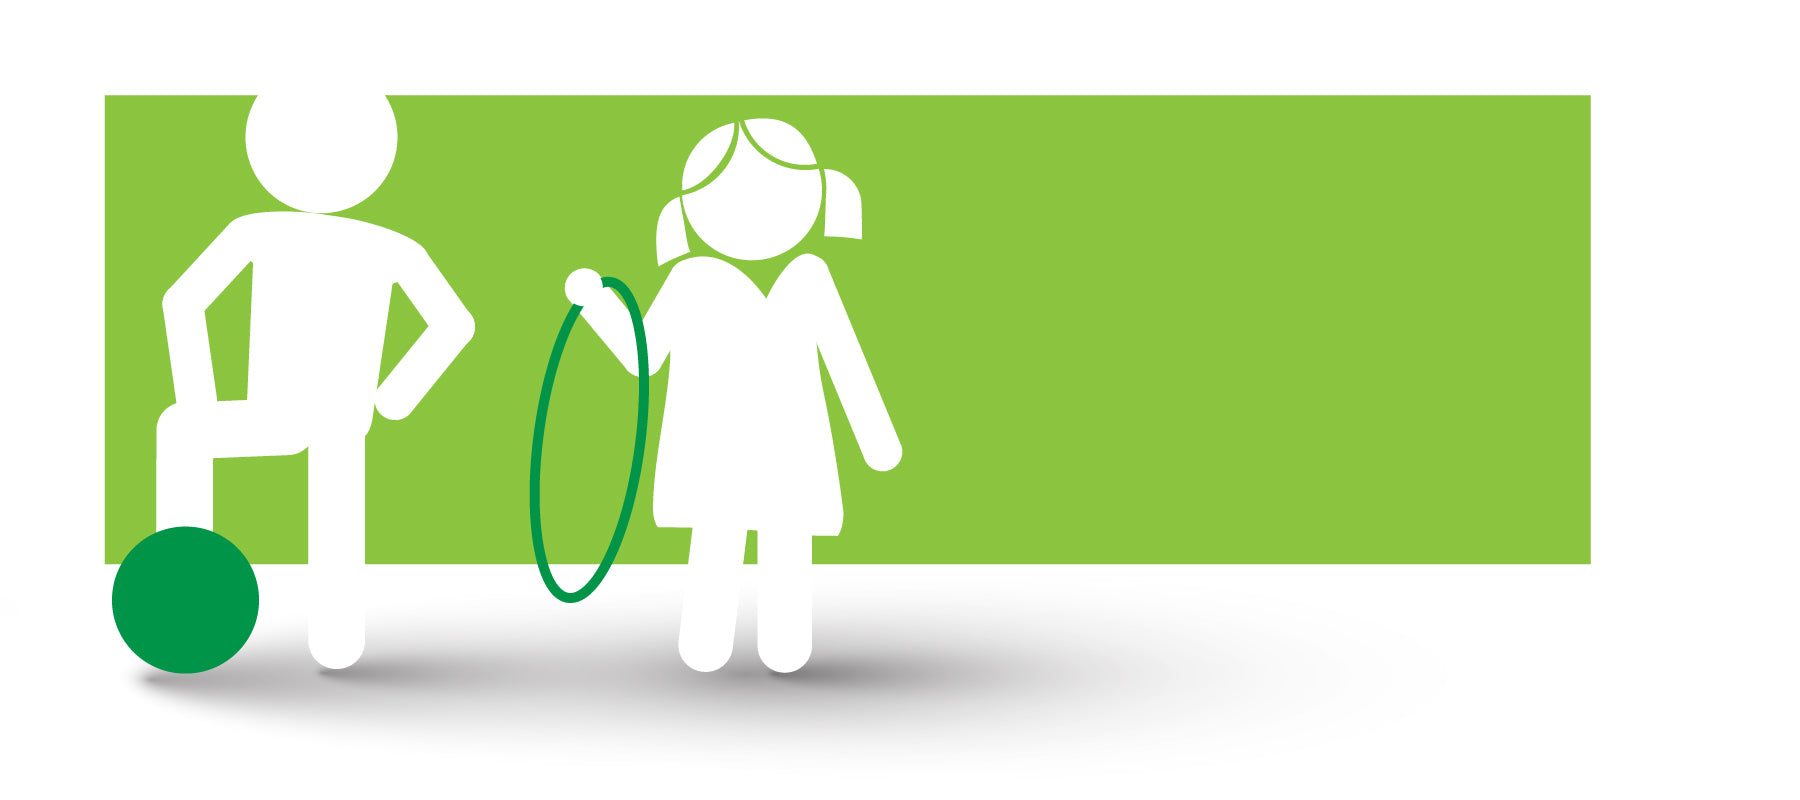 Two white figures silhouetted against a green background—one with a foot on a ball, the other holding a hula-hoop